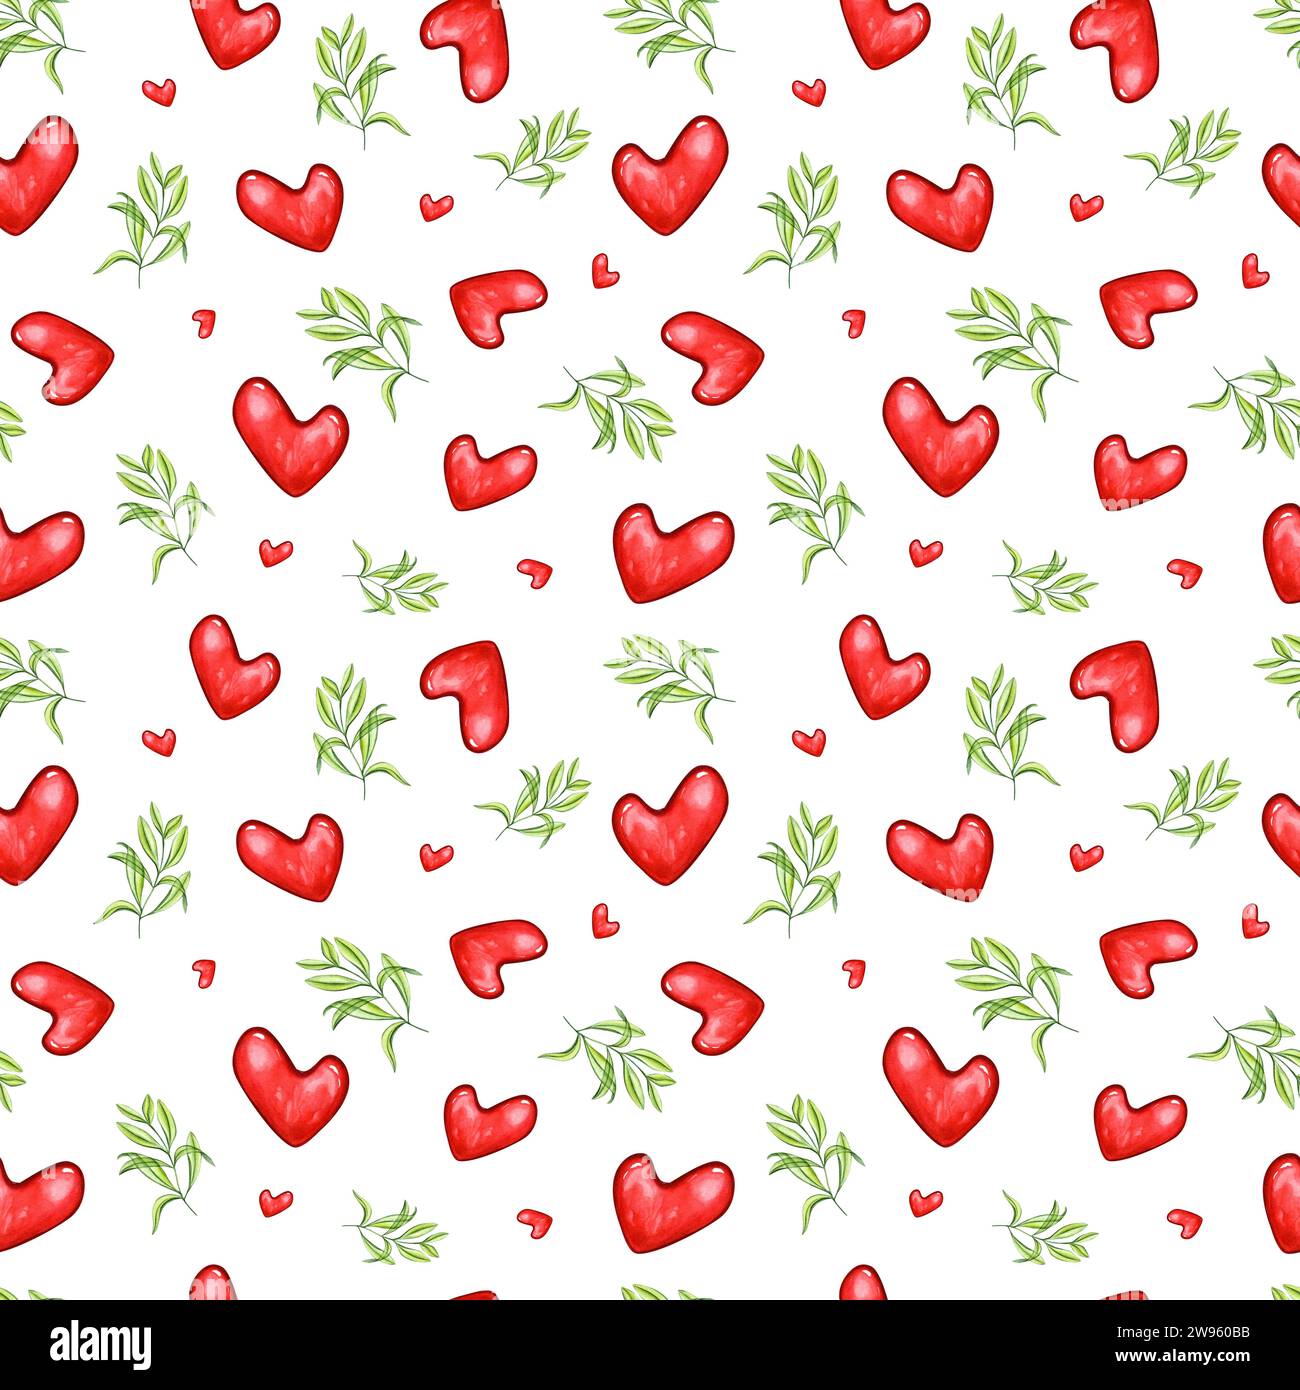 Spring seamless pattern with red hearts and fresh green plants. Floral ornate in transparent style. Watercolor illustration of romance heart. Stock Photo